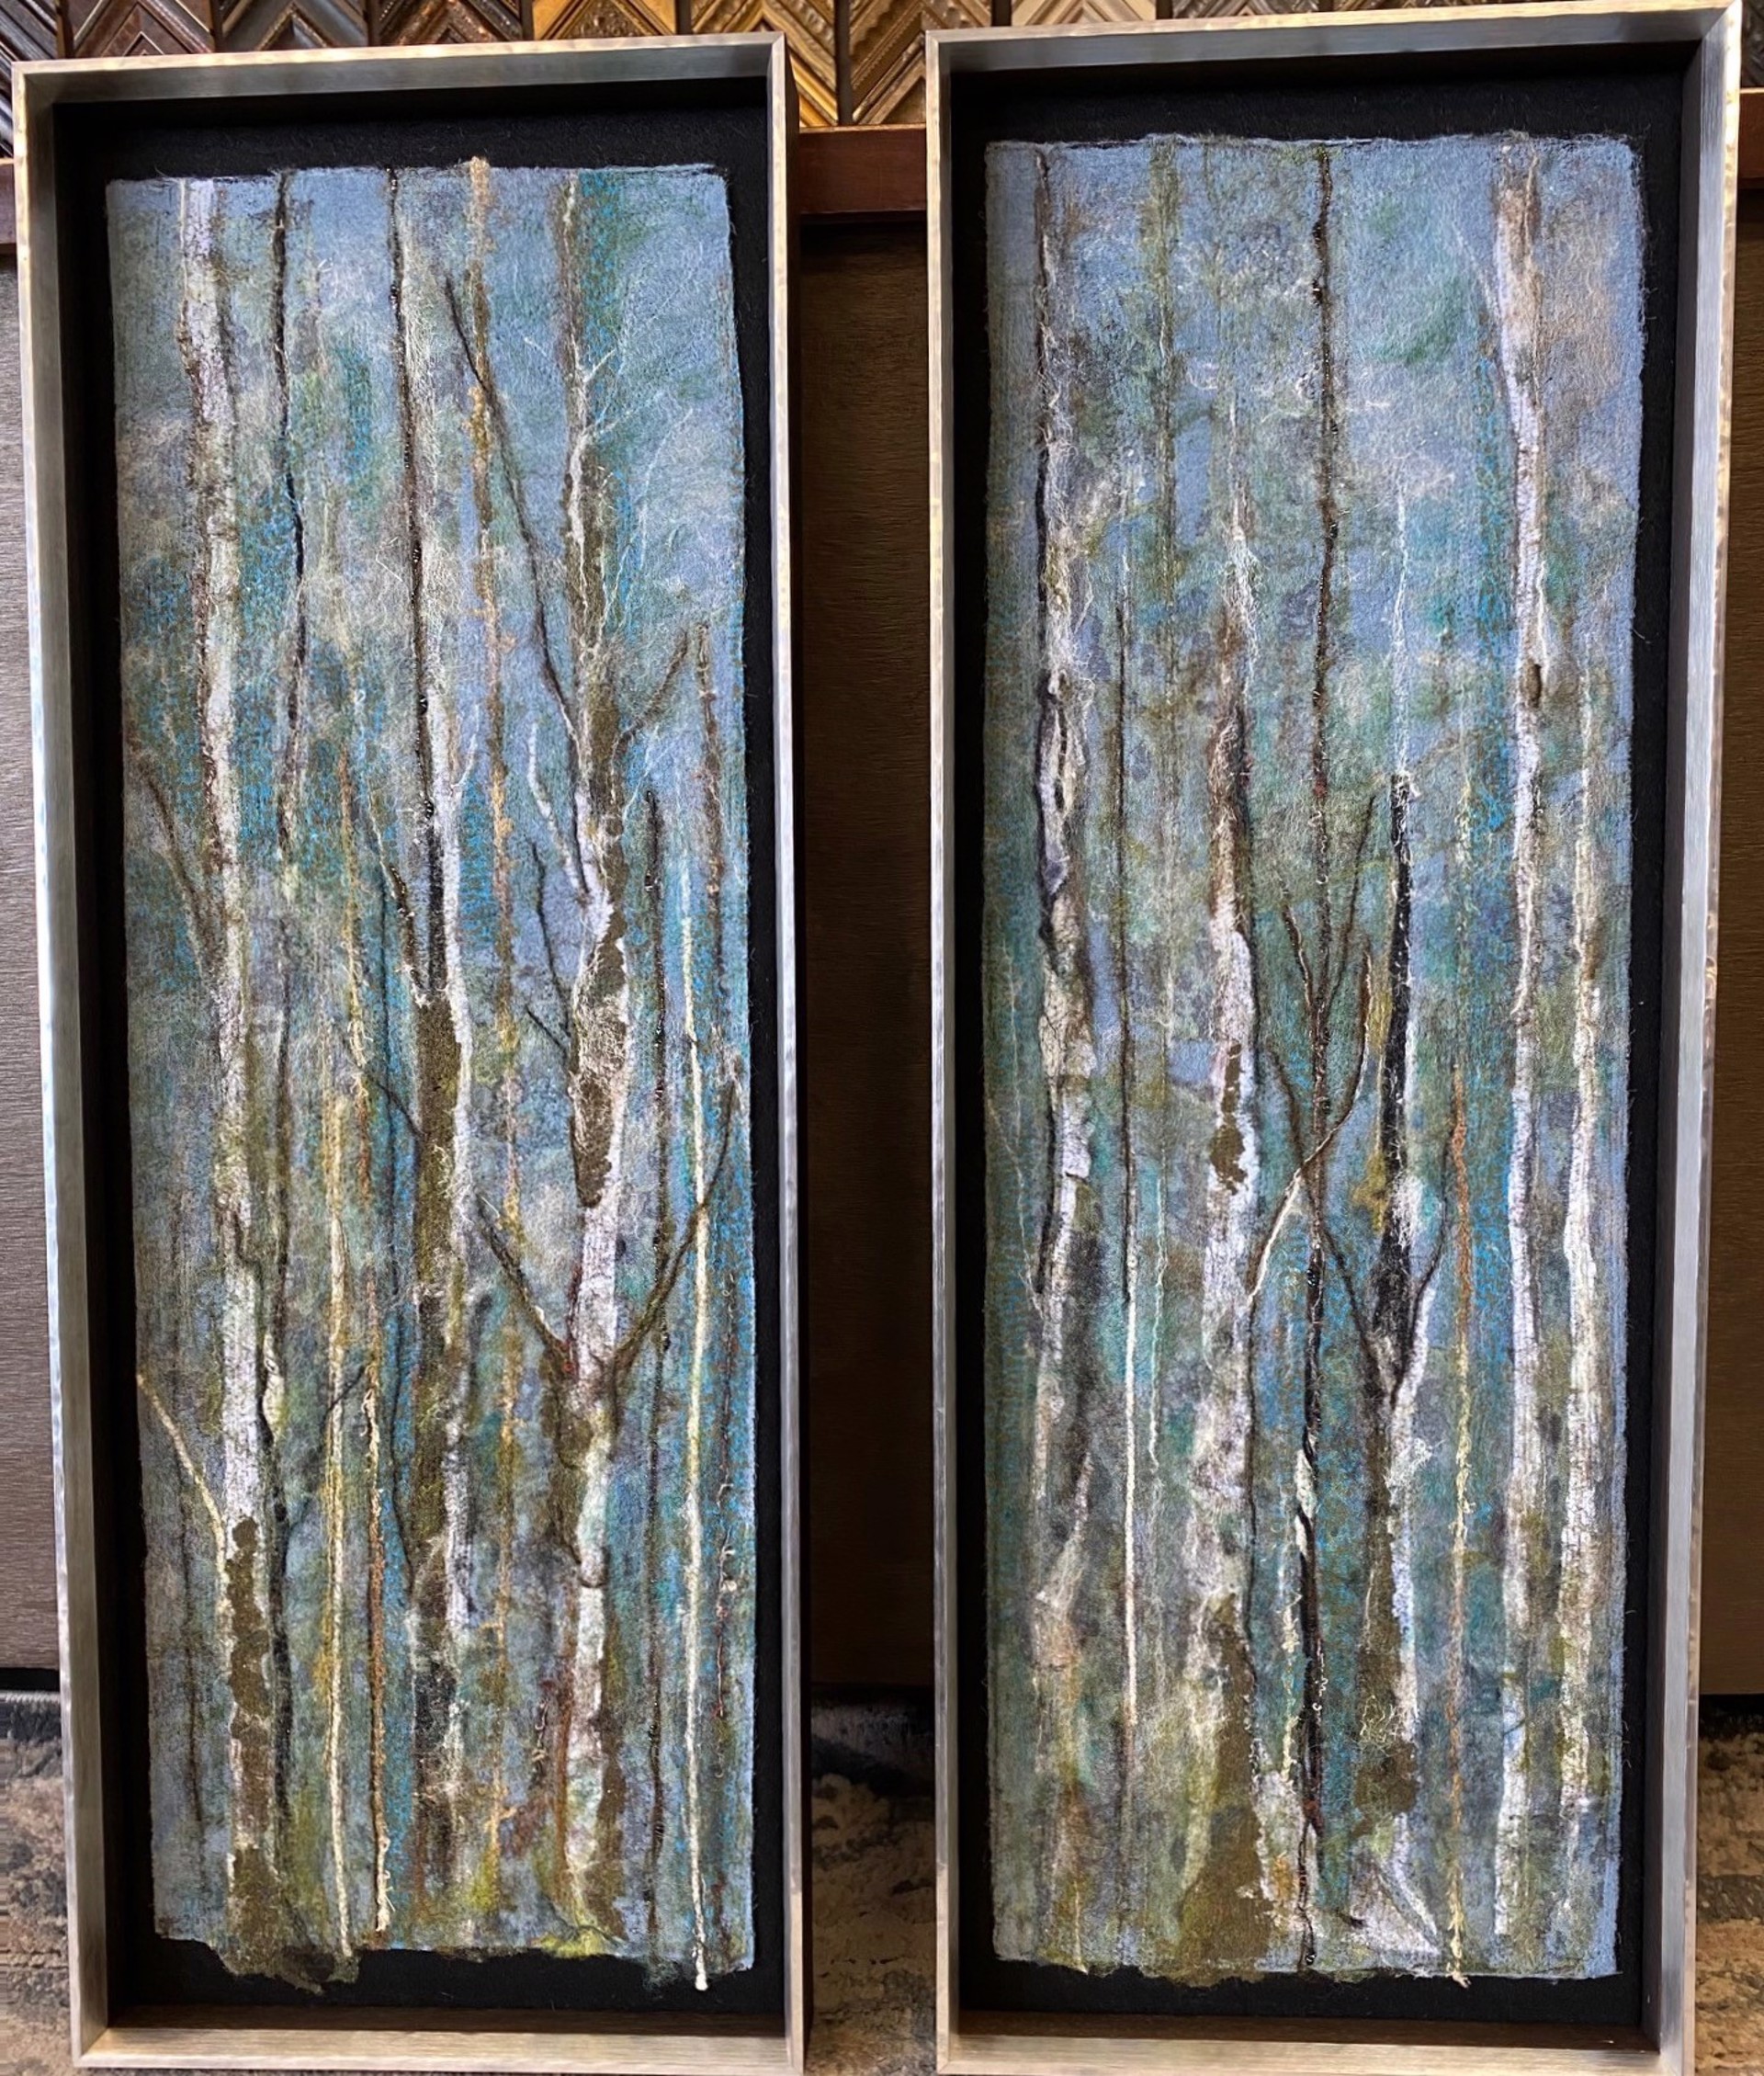 Birch Trees Revisited - Forest Bathing Diptych by Marti Liddle-Lameti